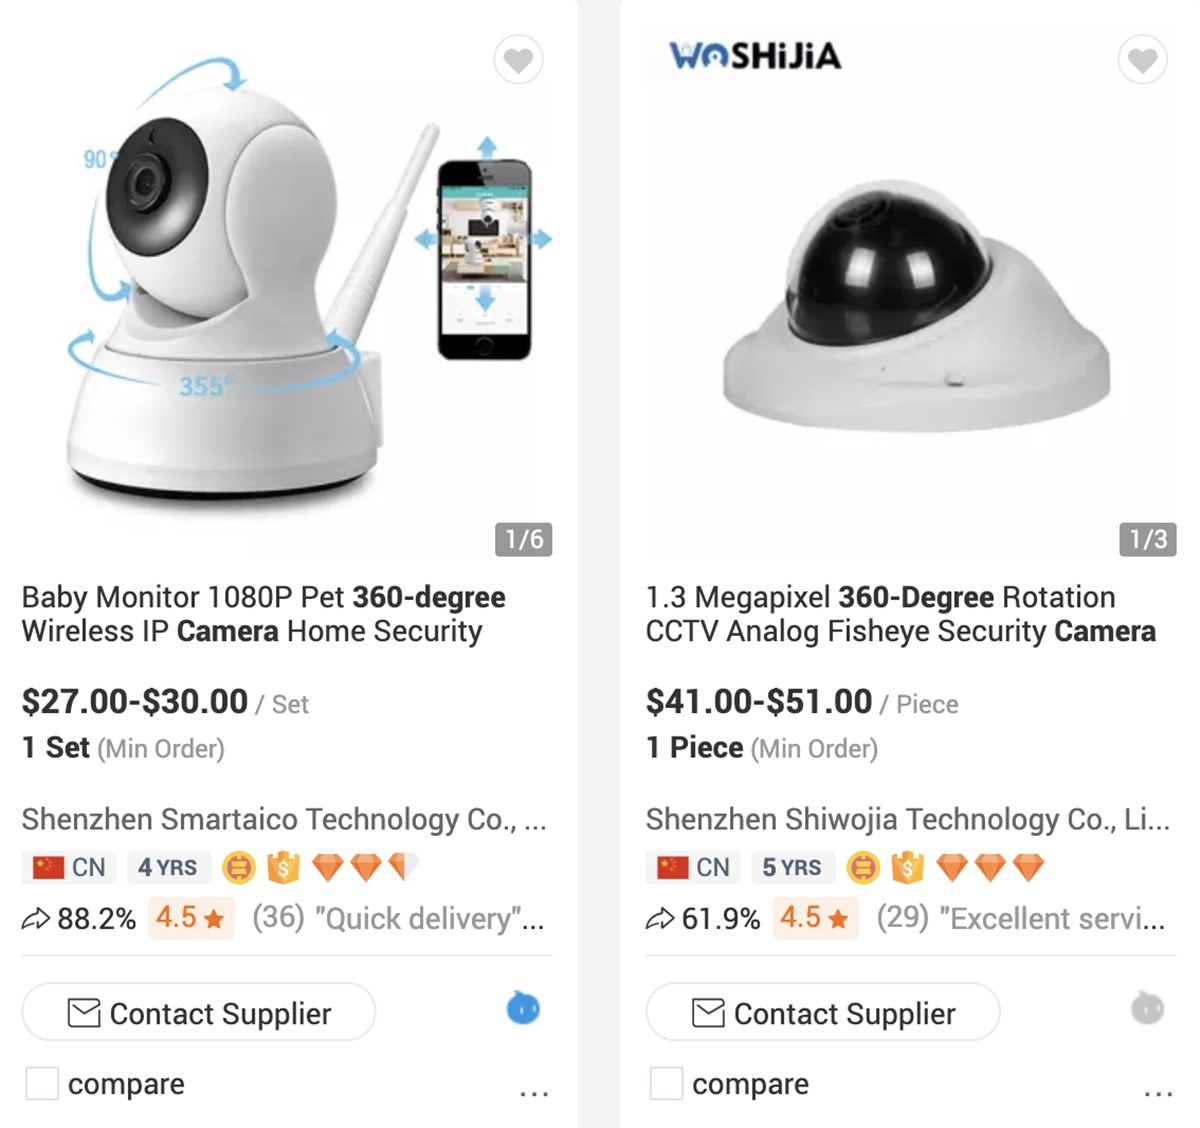 Best Niches for dropshipping: 360-degree cameras